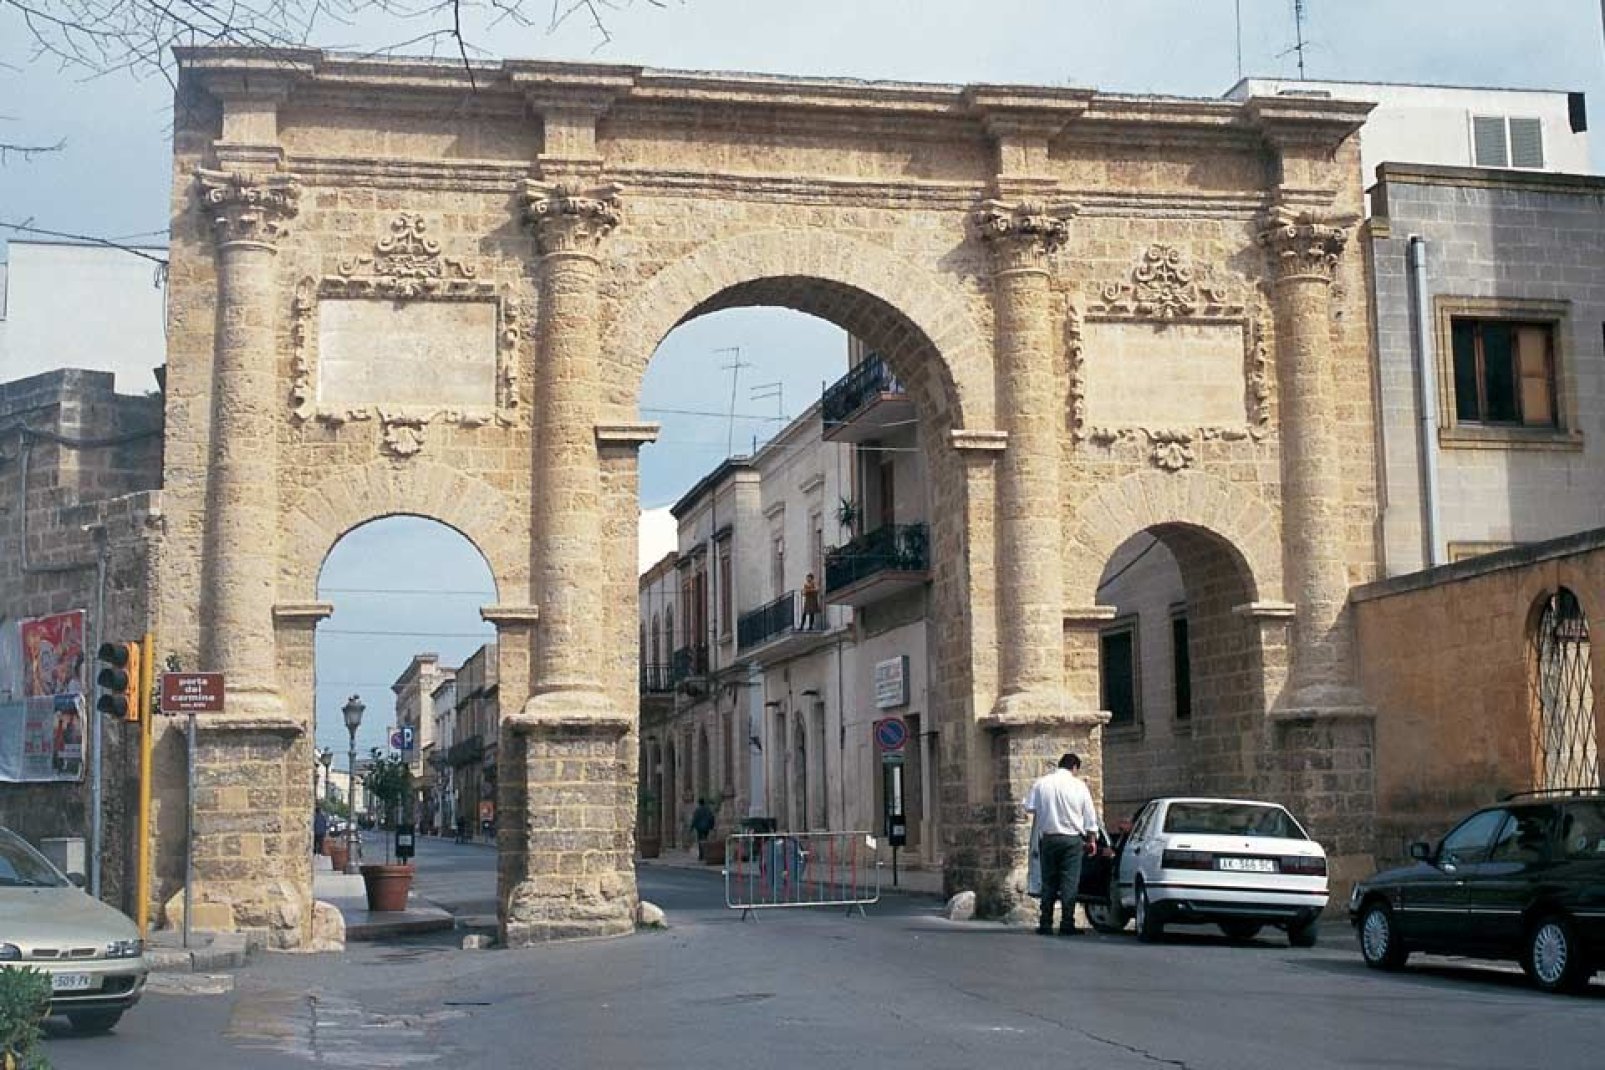 Brindisi is an ancient city that served as an important crossroads between Italy and the Middle East, as evidenced by its great artistic treasures